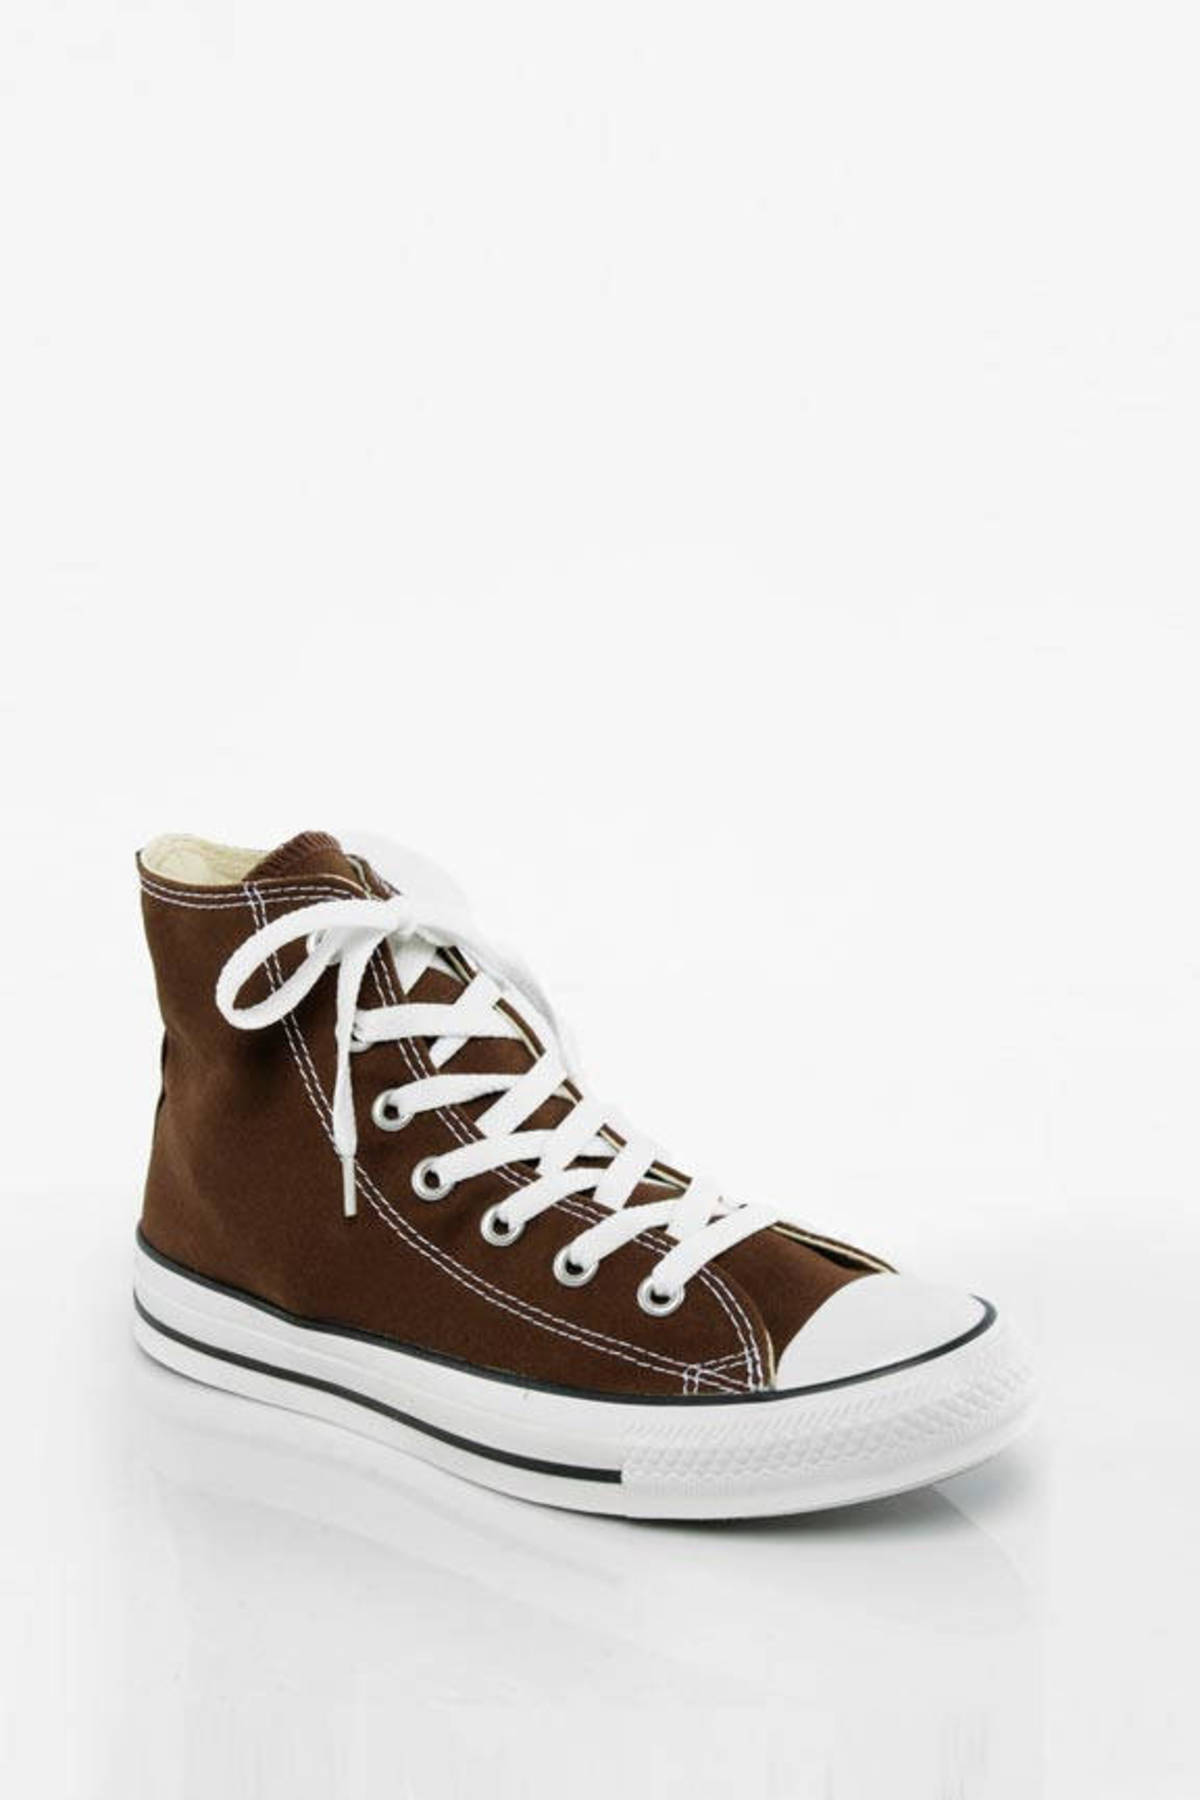 Brown Converse Sneakers - Converse All Stars - Brown Chuck Taylors